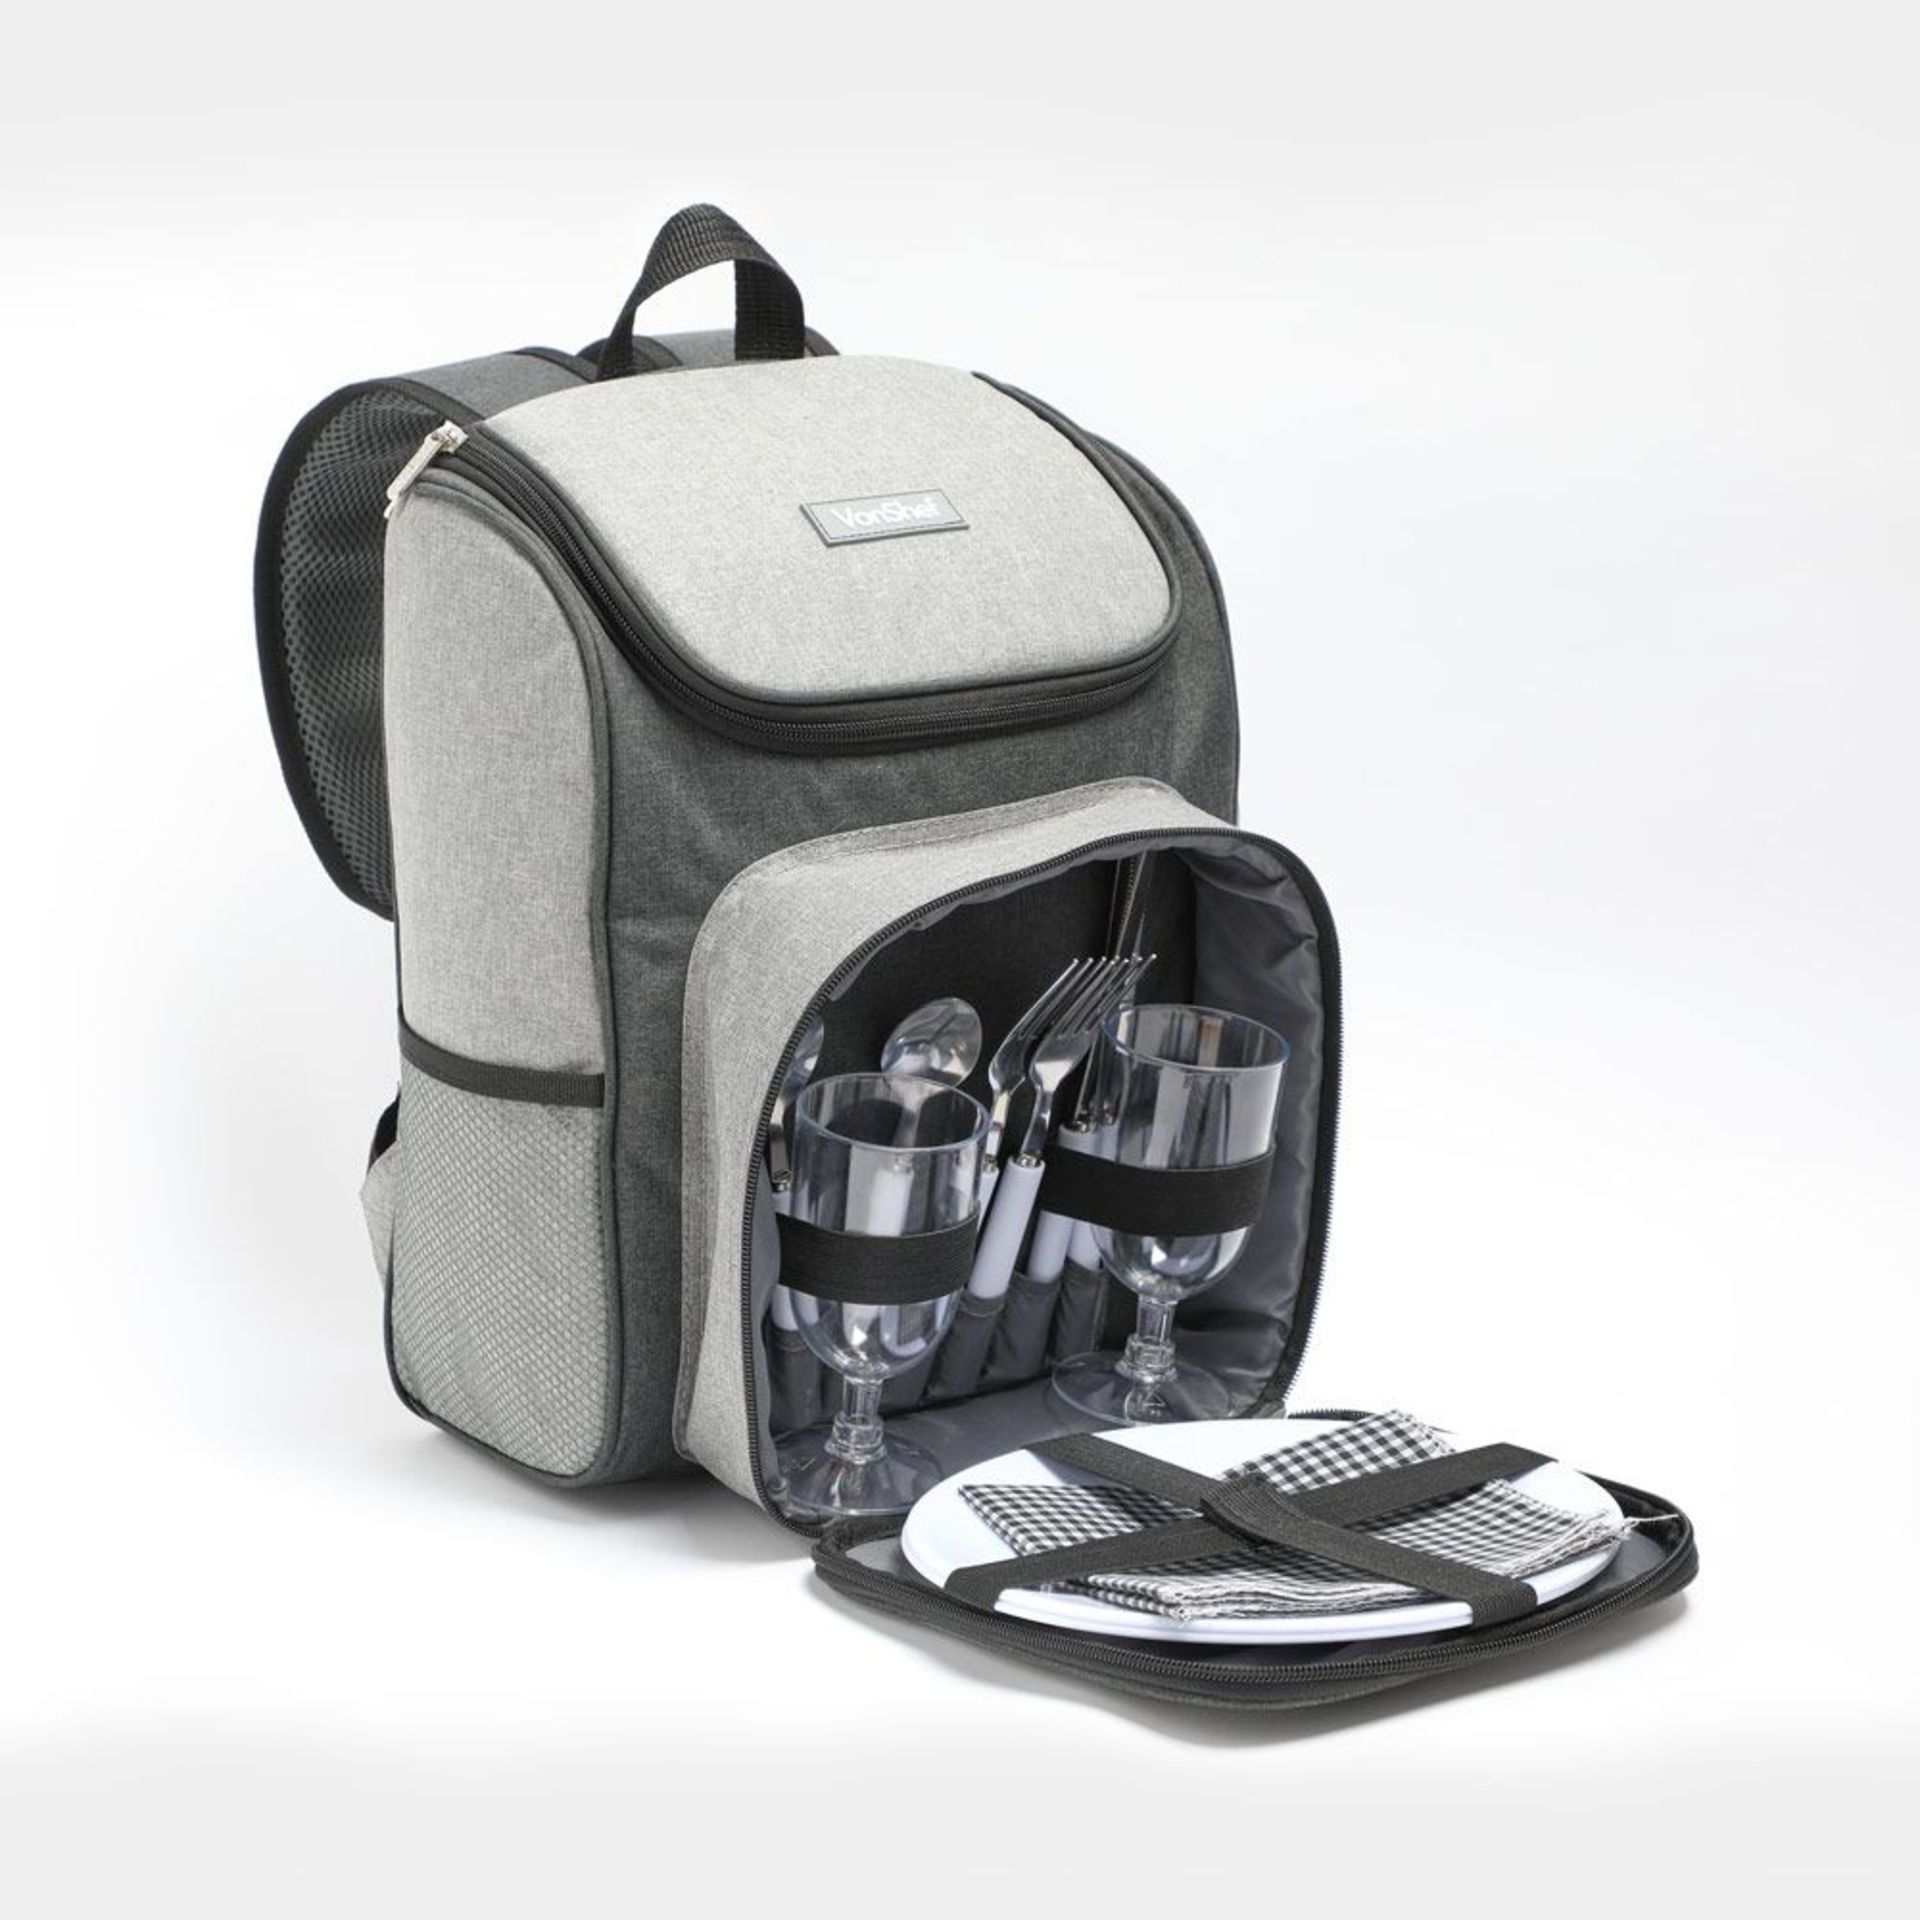 Picnic Backpack - 2 Person. - BI. No more clattering cutlery or spilt drinks, our two-person